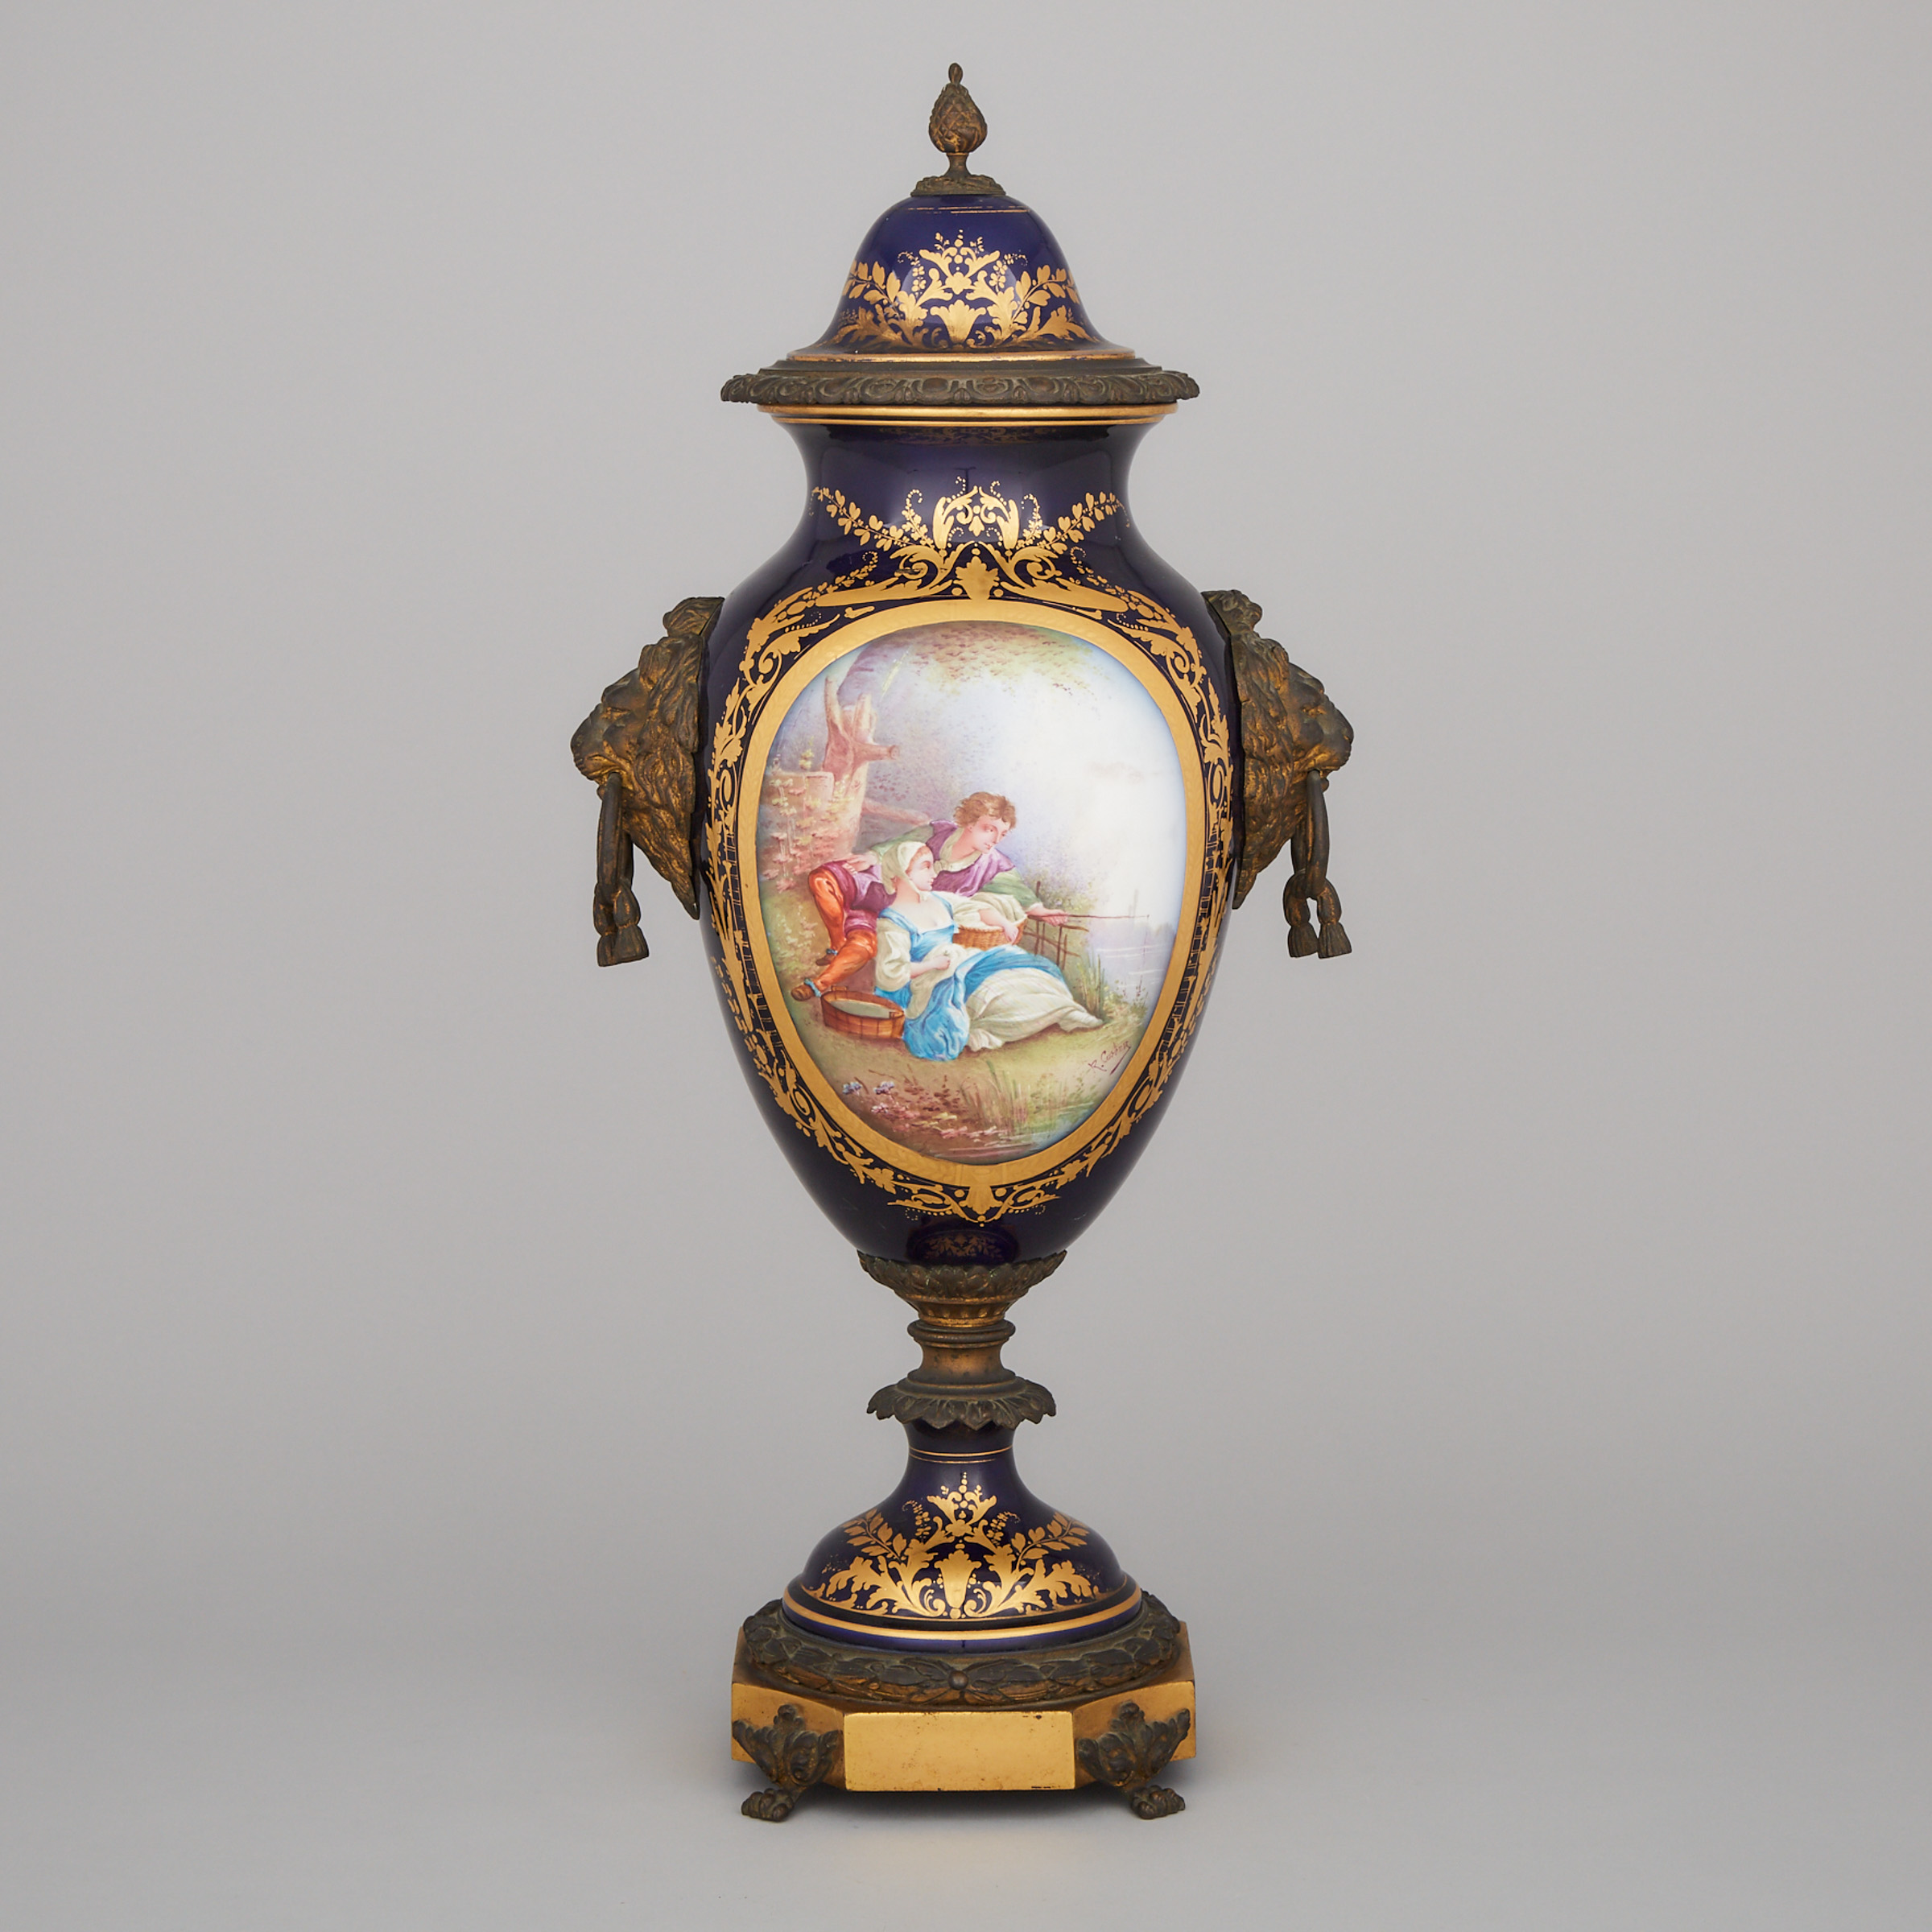 Large Ormolu Mounted 'Sèvres' Blue Ground Vase and Cover, late 19th century